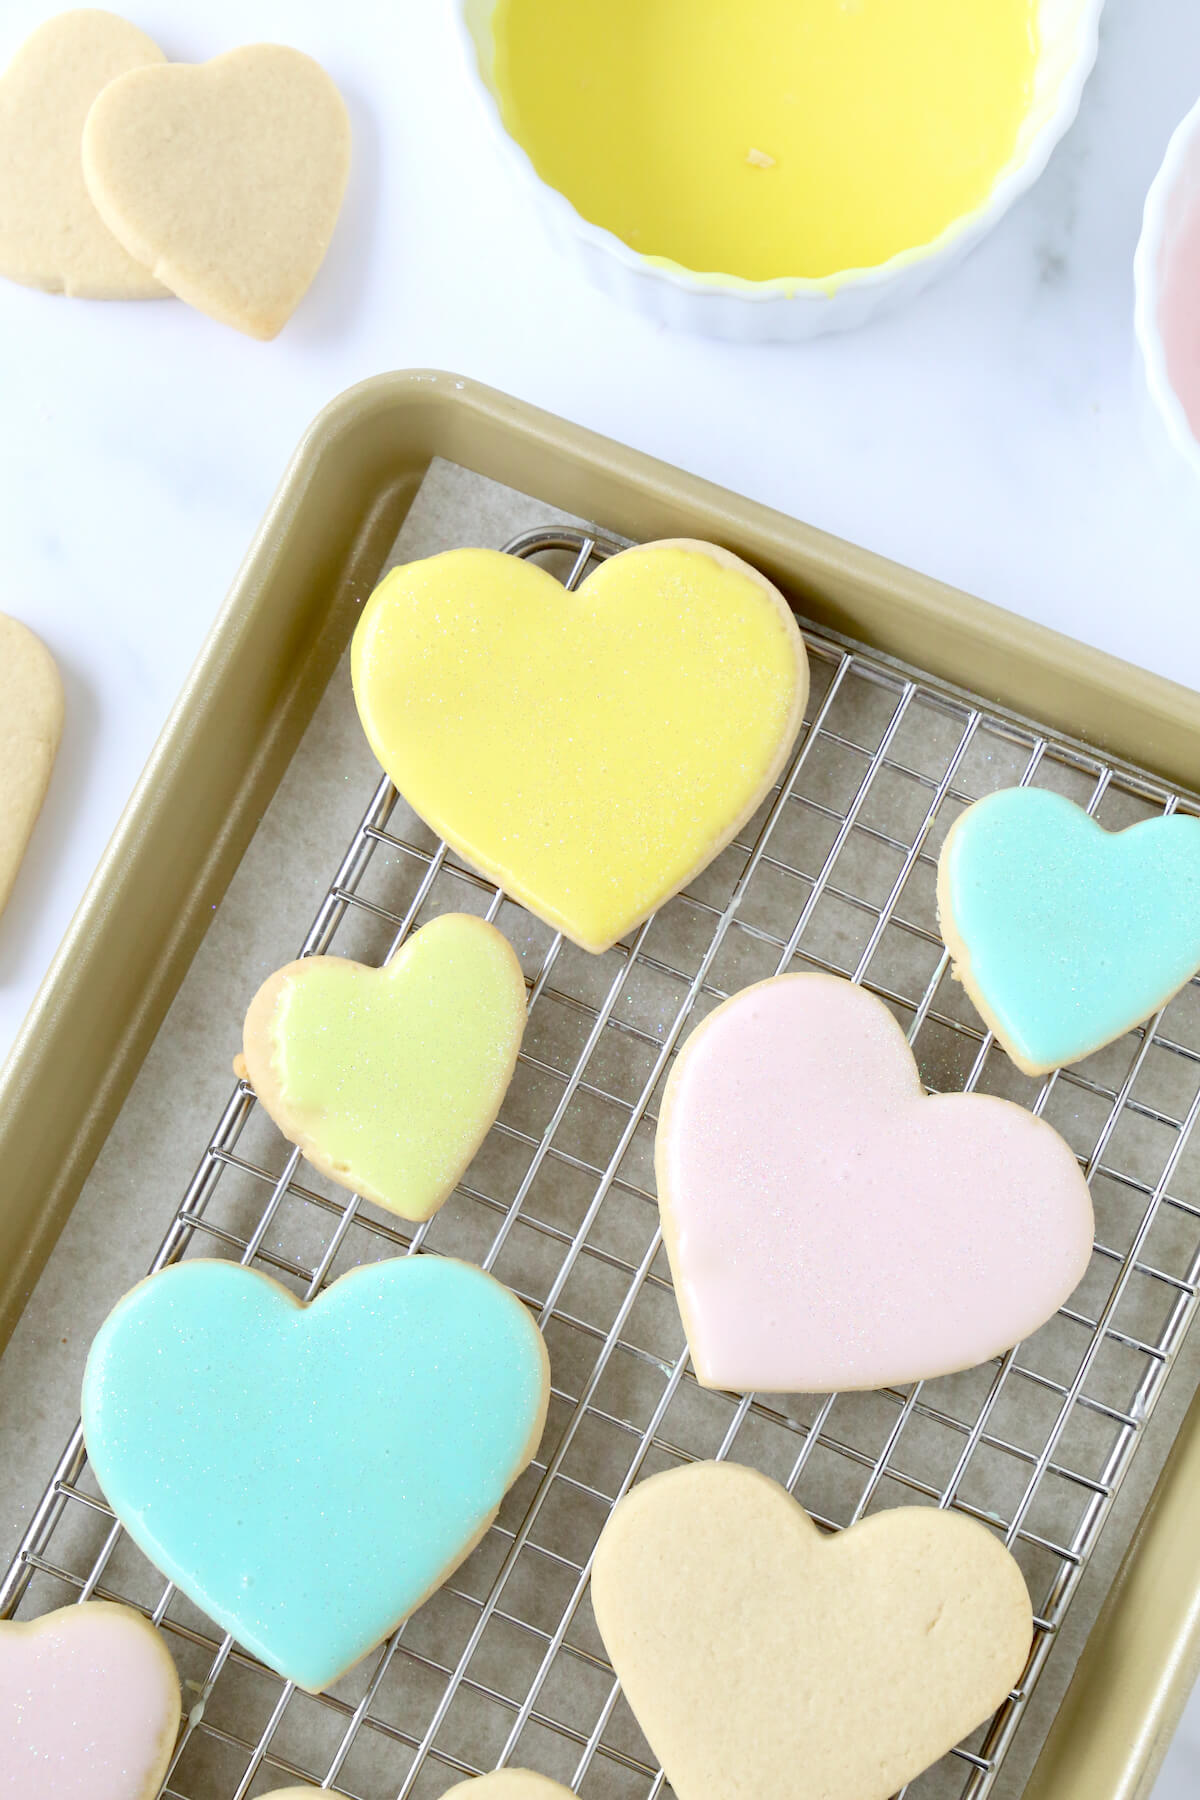 Heart cookies on a tray with a cooling rack.